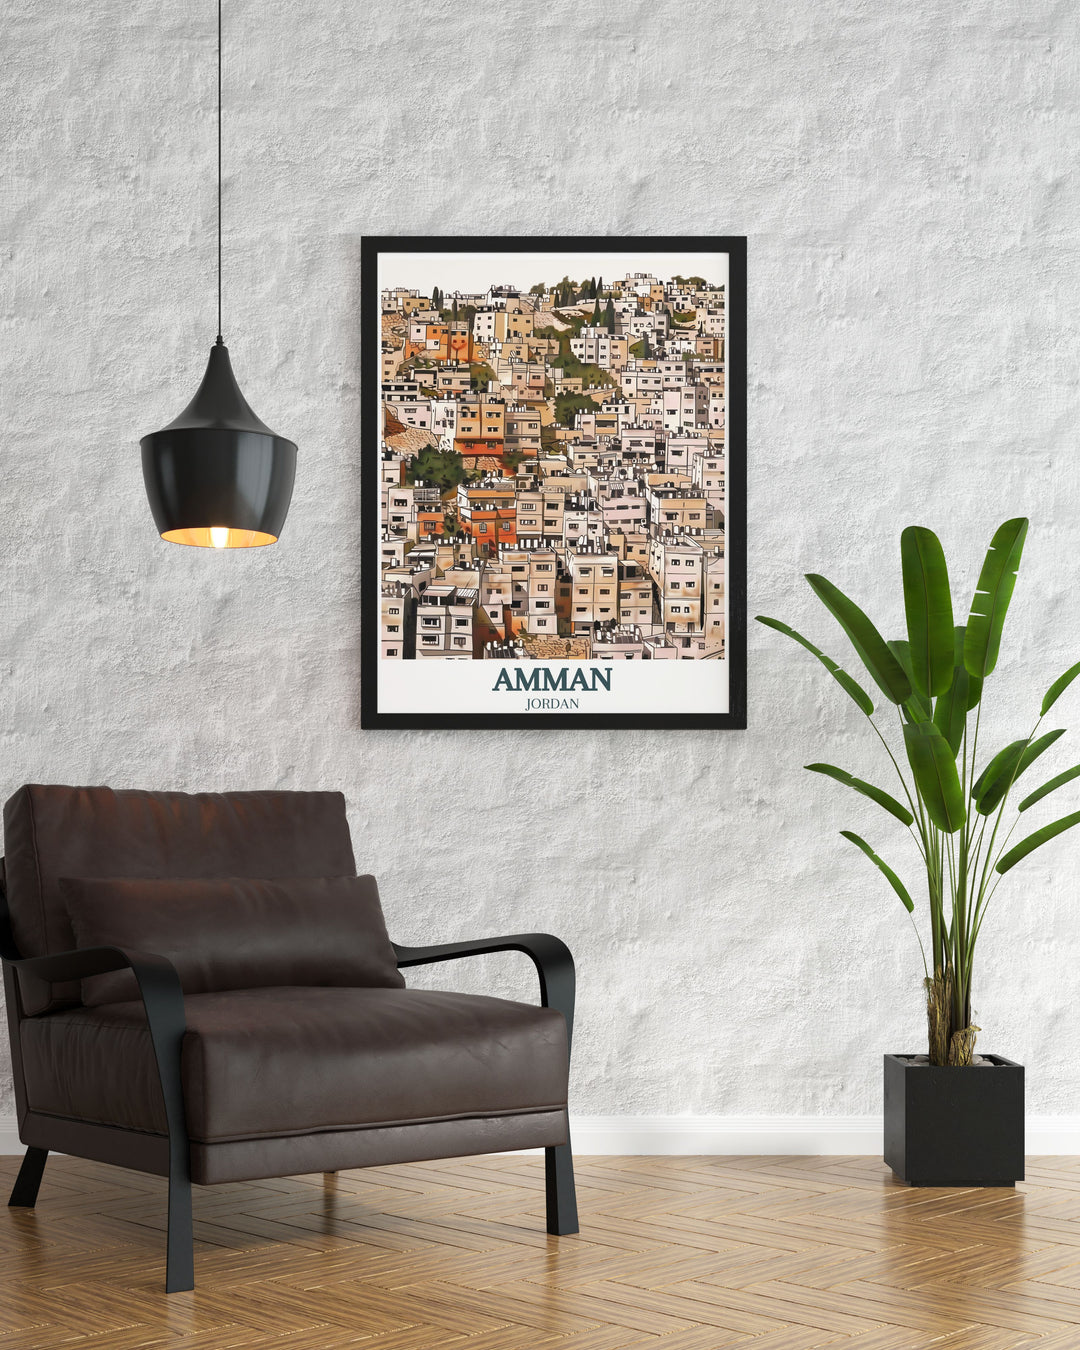 Captivating Amman Photo capturing the beauty of Jabal Amman Mango street ideal for creating a travel themed wall art gallery in your home or office